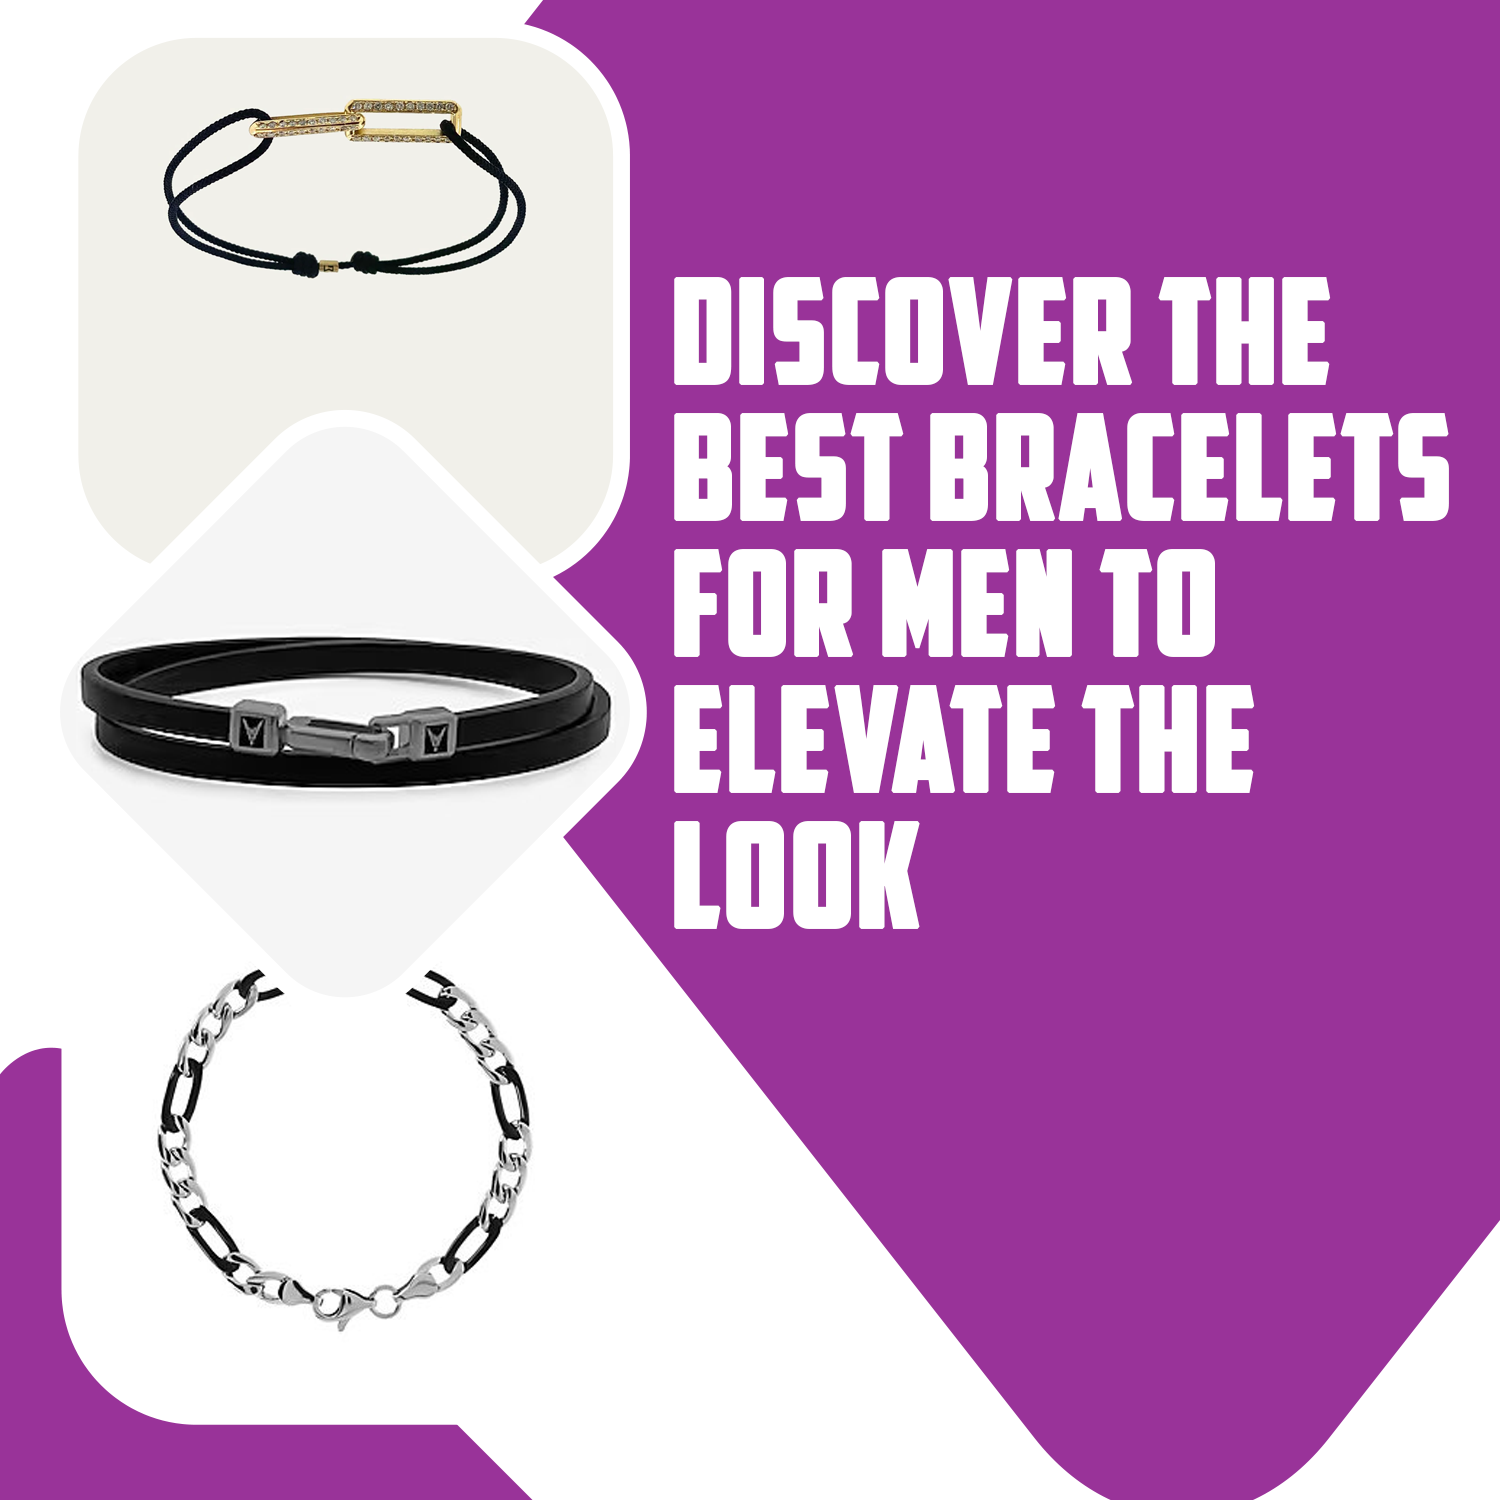 Discover The Best Bracelets for Men to Elevate The Look